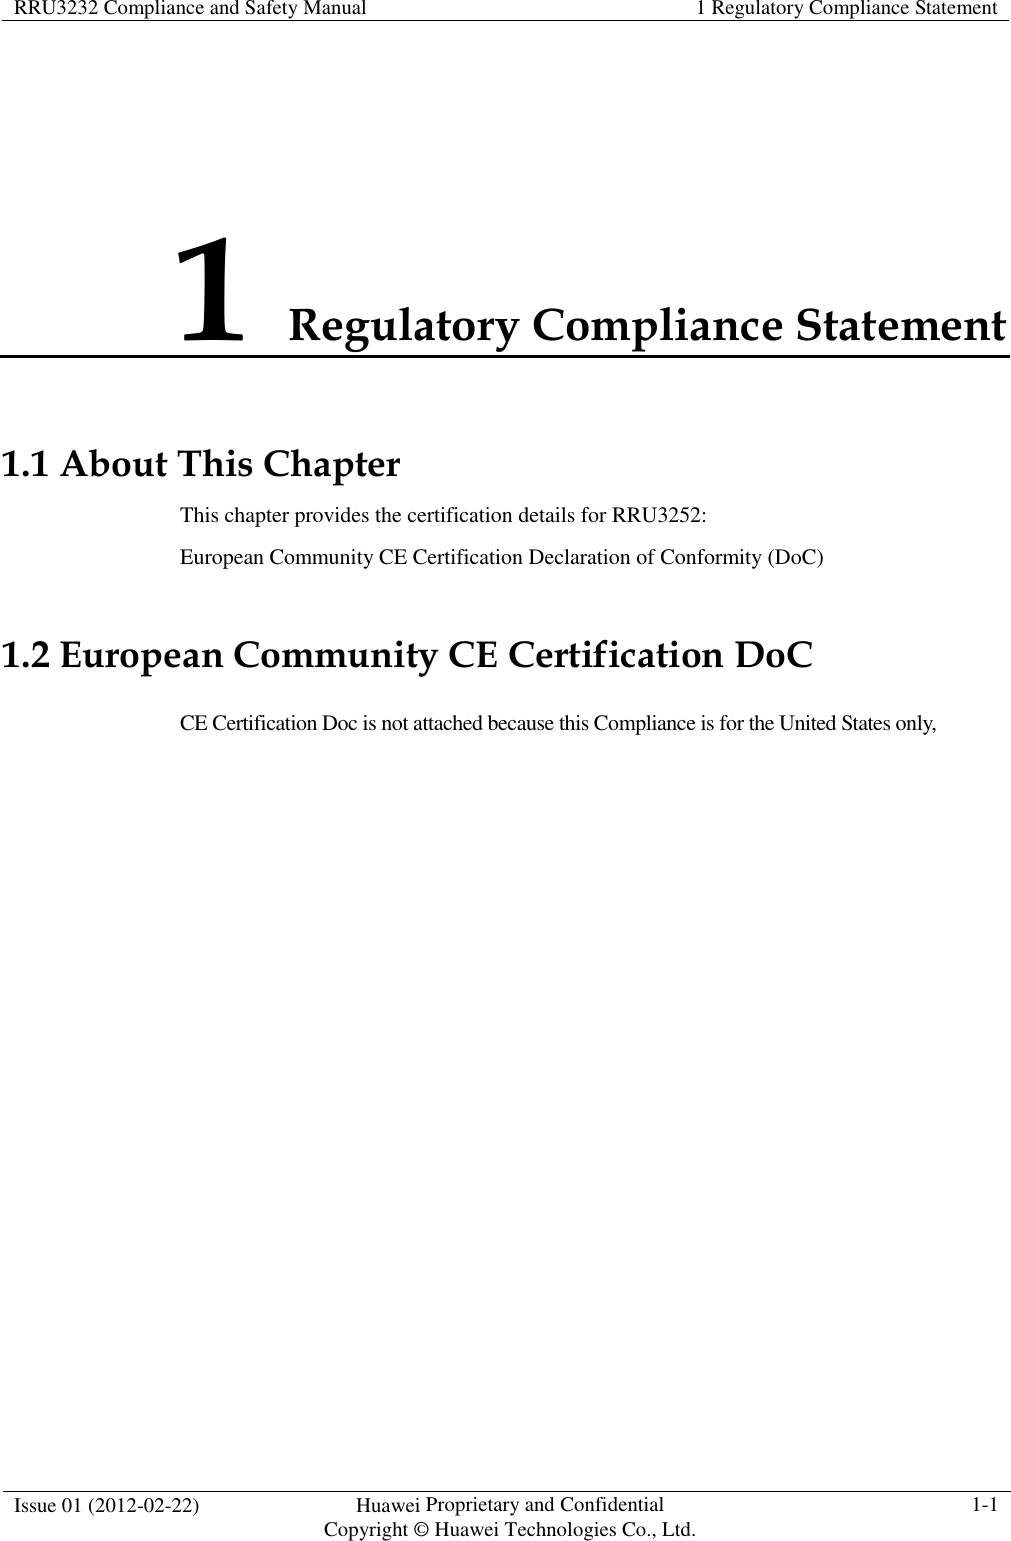 RRU3232 Compliance and Safety Manual  1 Regulatory Compliance Statement  Issue 01 (2012-02-22)  Huawei Proprietary and Confidential           Copyright © Huawei Technologies Co., Ltd. 1-1  1 Regulatory Compliance Statement 1.1 About This Chapter This chapter provides the certification details for RRU3252: European Community CE Certification Declaration of Conformity (DoC) 1.2 European Community CE Certification DoC CE Certification Doc is not attached because this Compliance is for the United States only,   